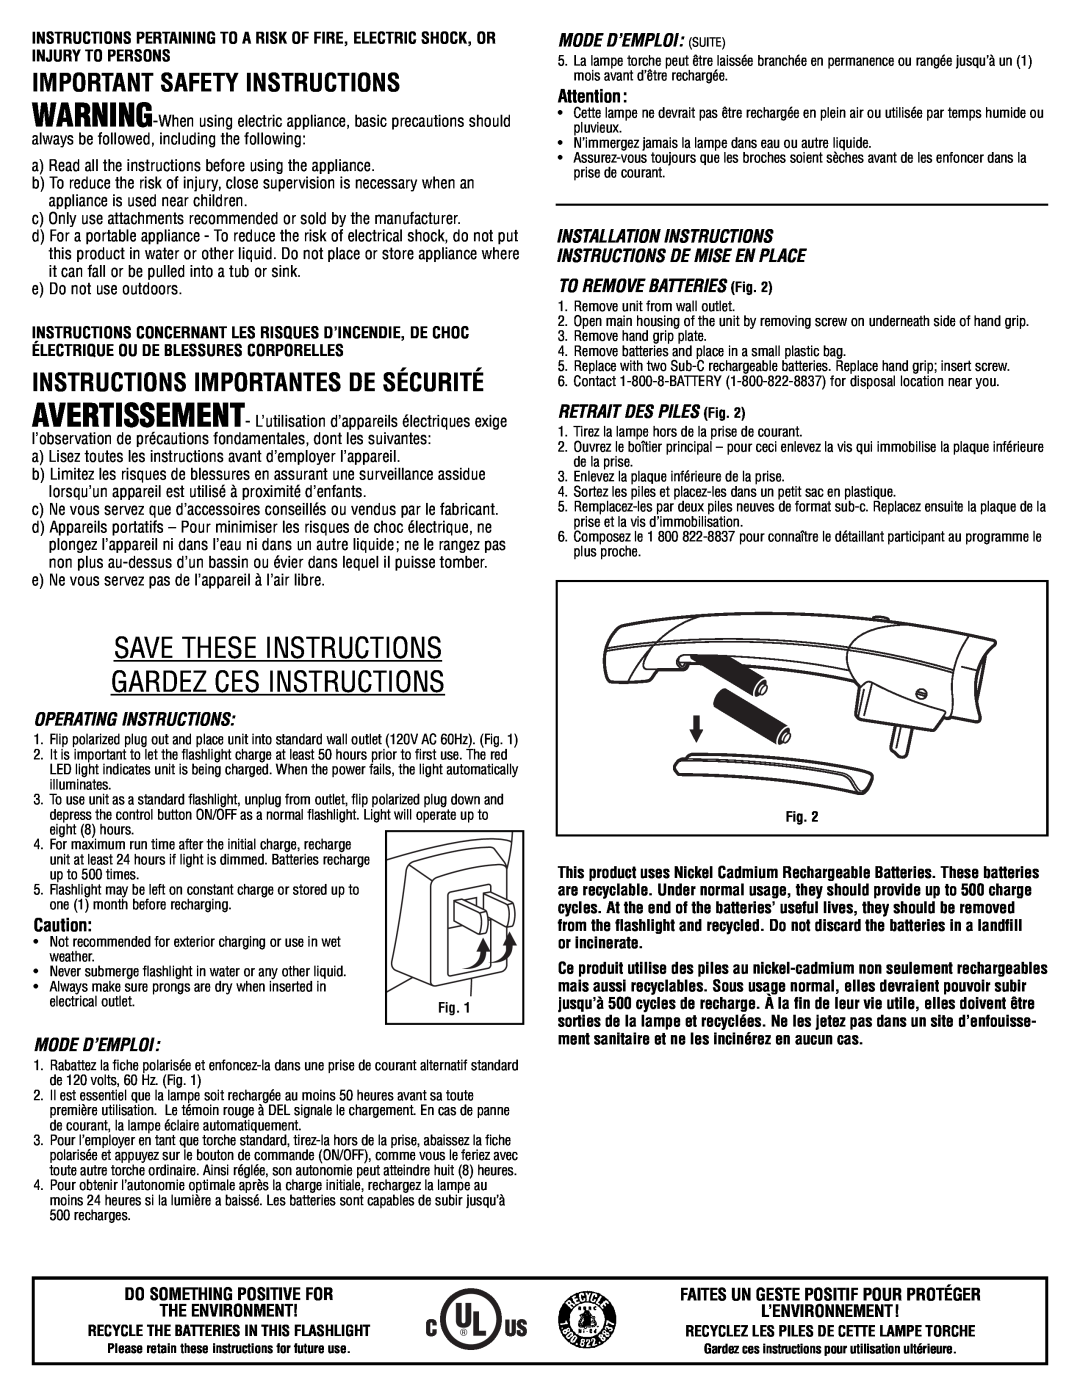 Coleman 4346 Important Safety Instructions, Save These Instructions Gardez Ces Instructions, Operating Instructions 